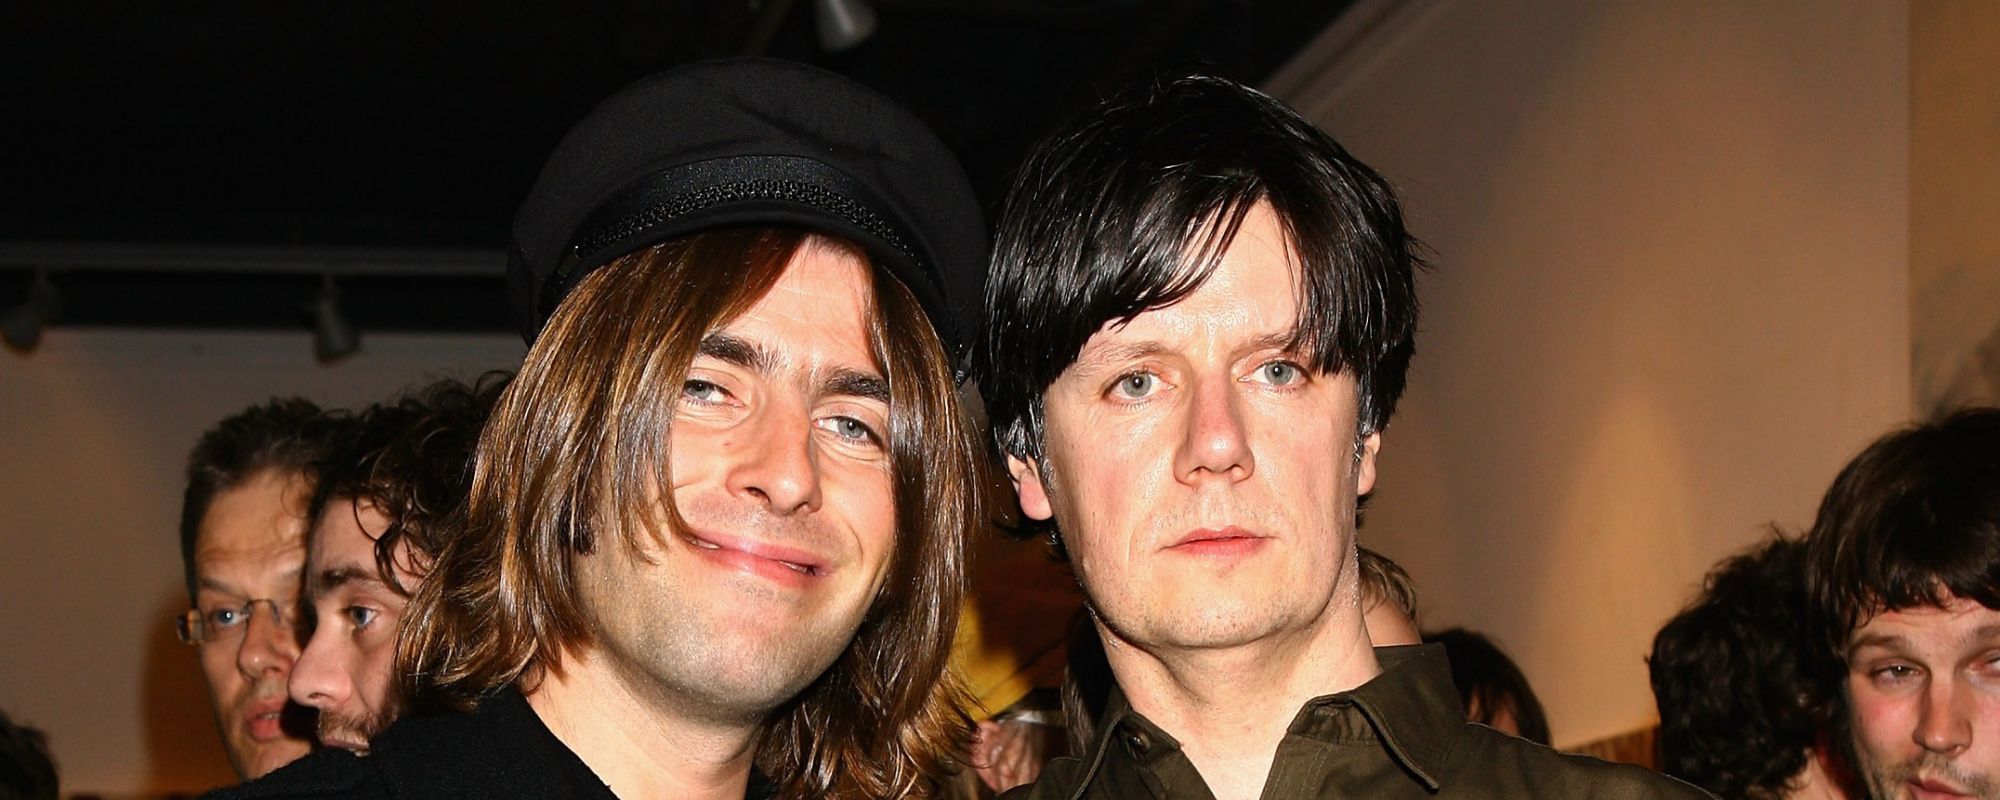 Watch Liam Gallagher and John Squire Deliver a Rousing Cover of The Rolling Stones